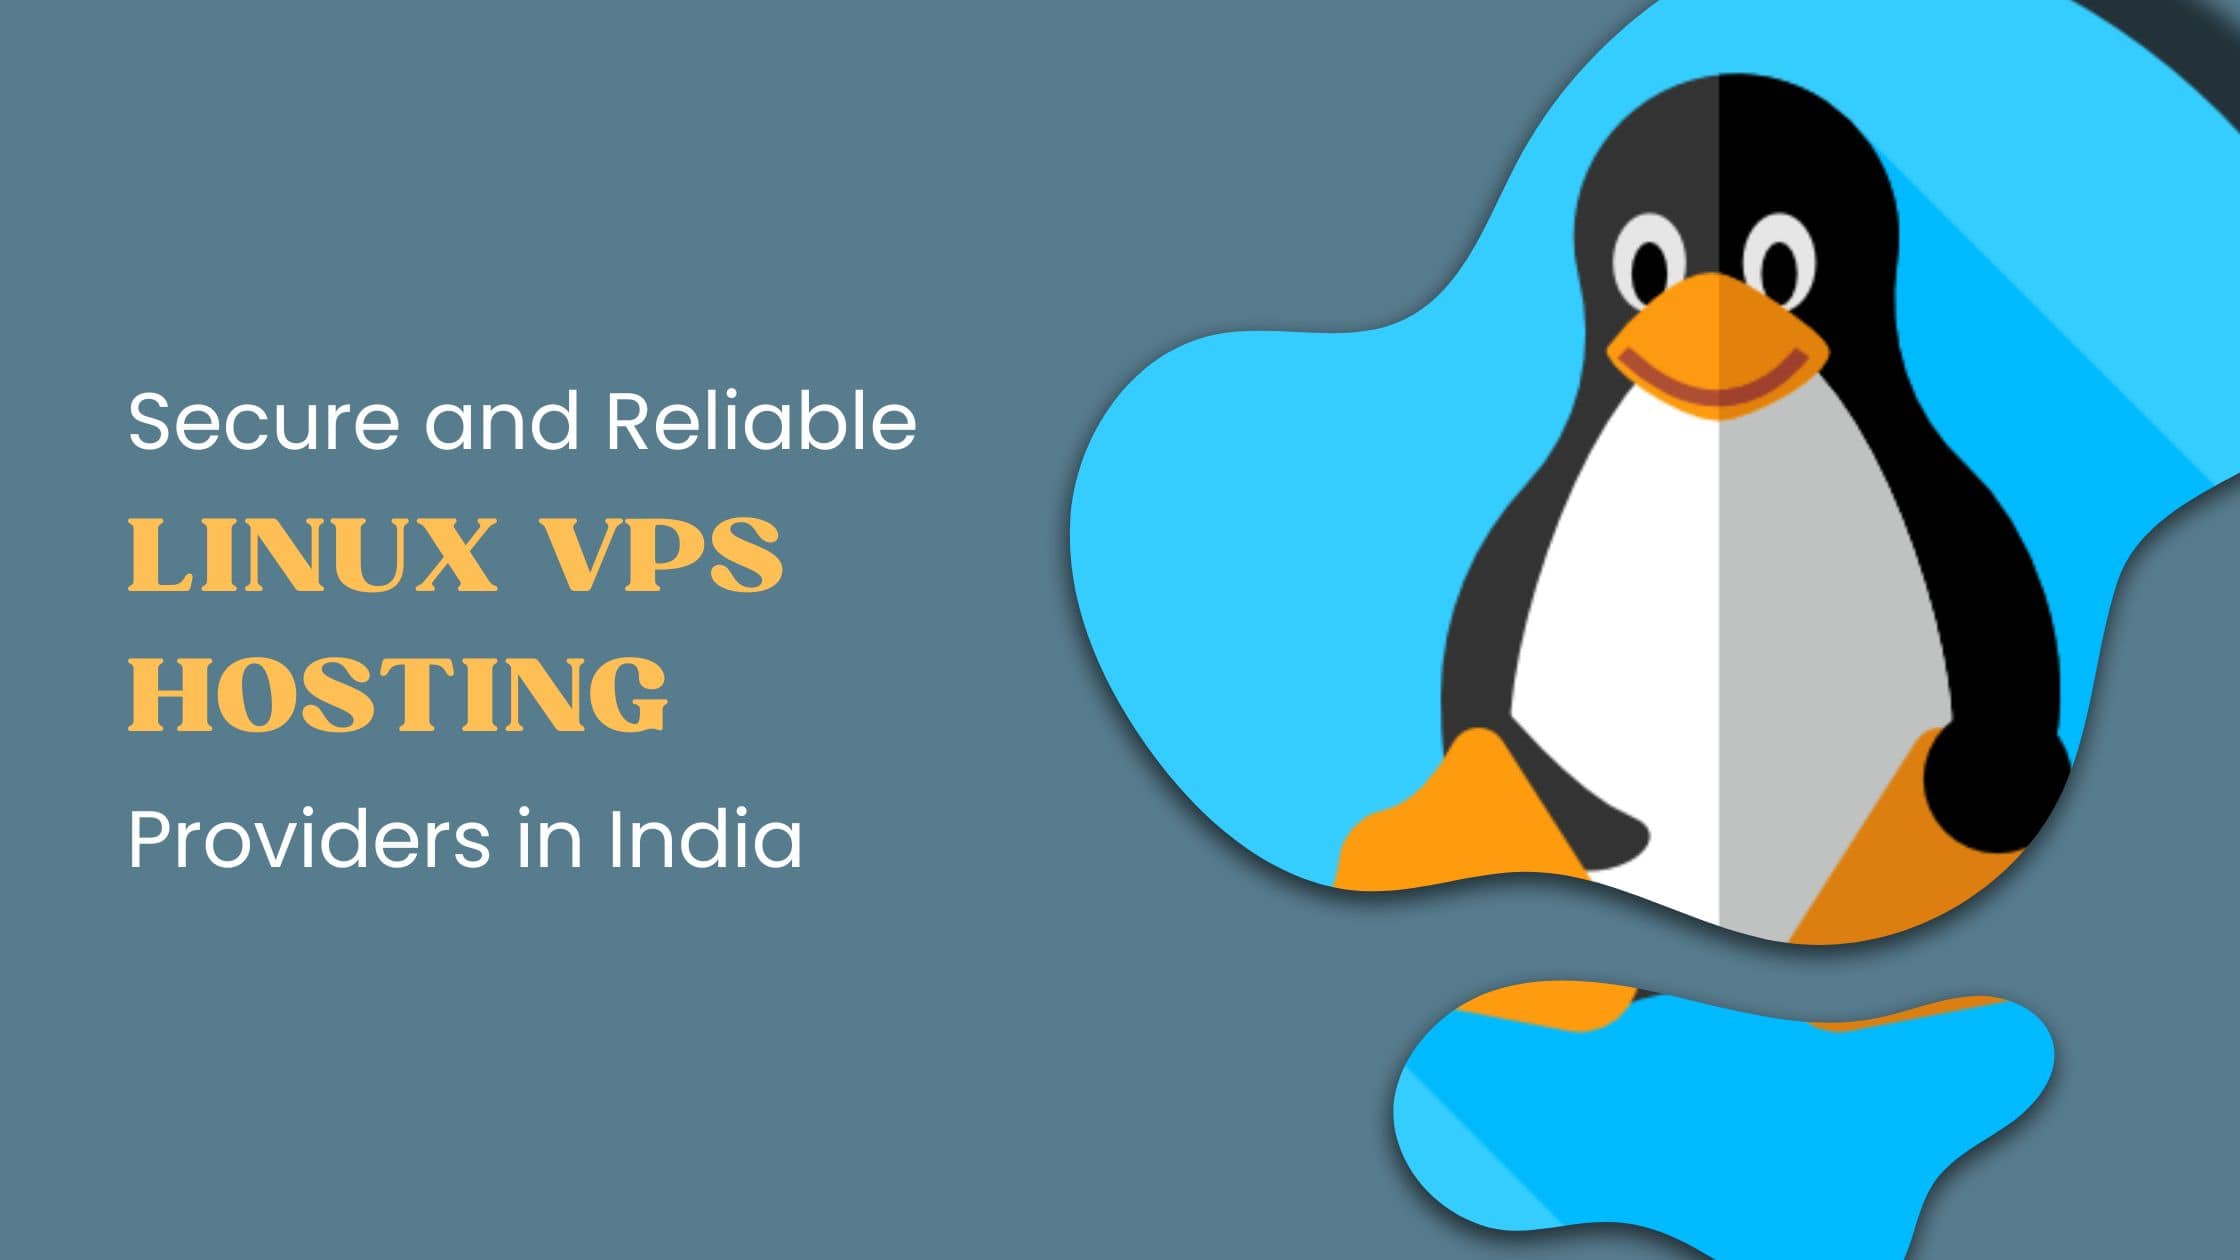 Secure and Reliable Linux VPS Hosting Providers in India